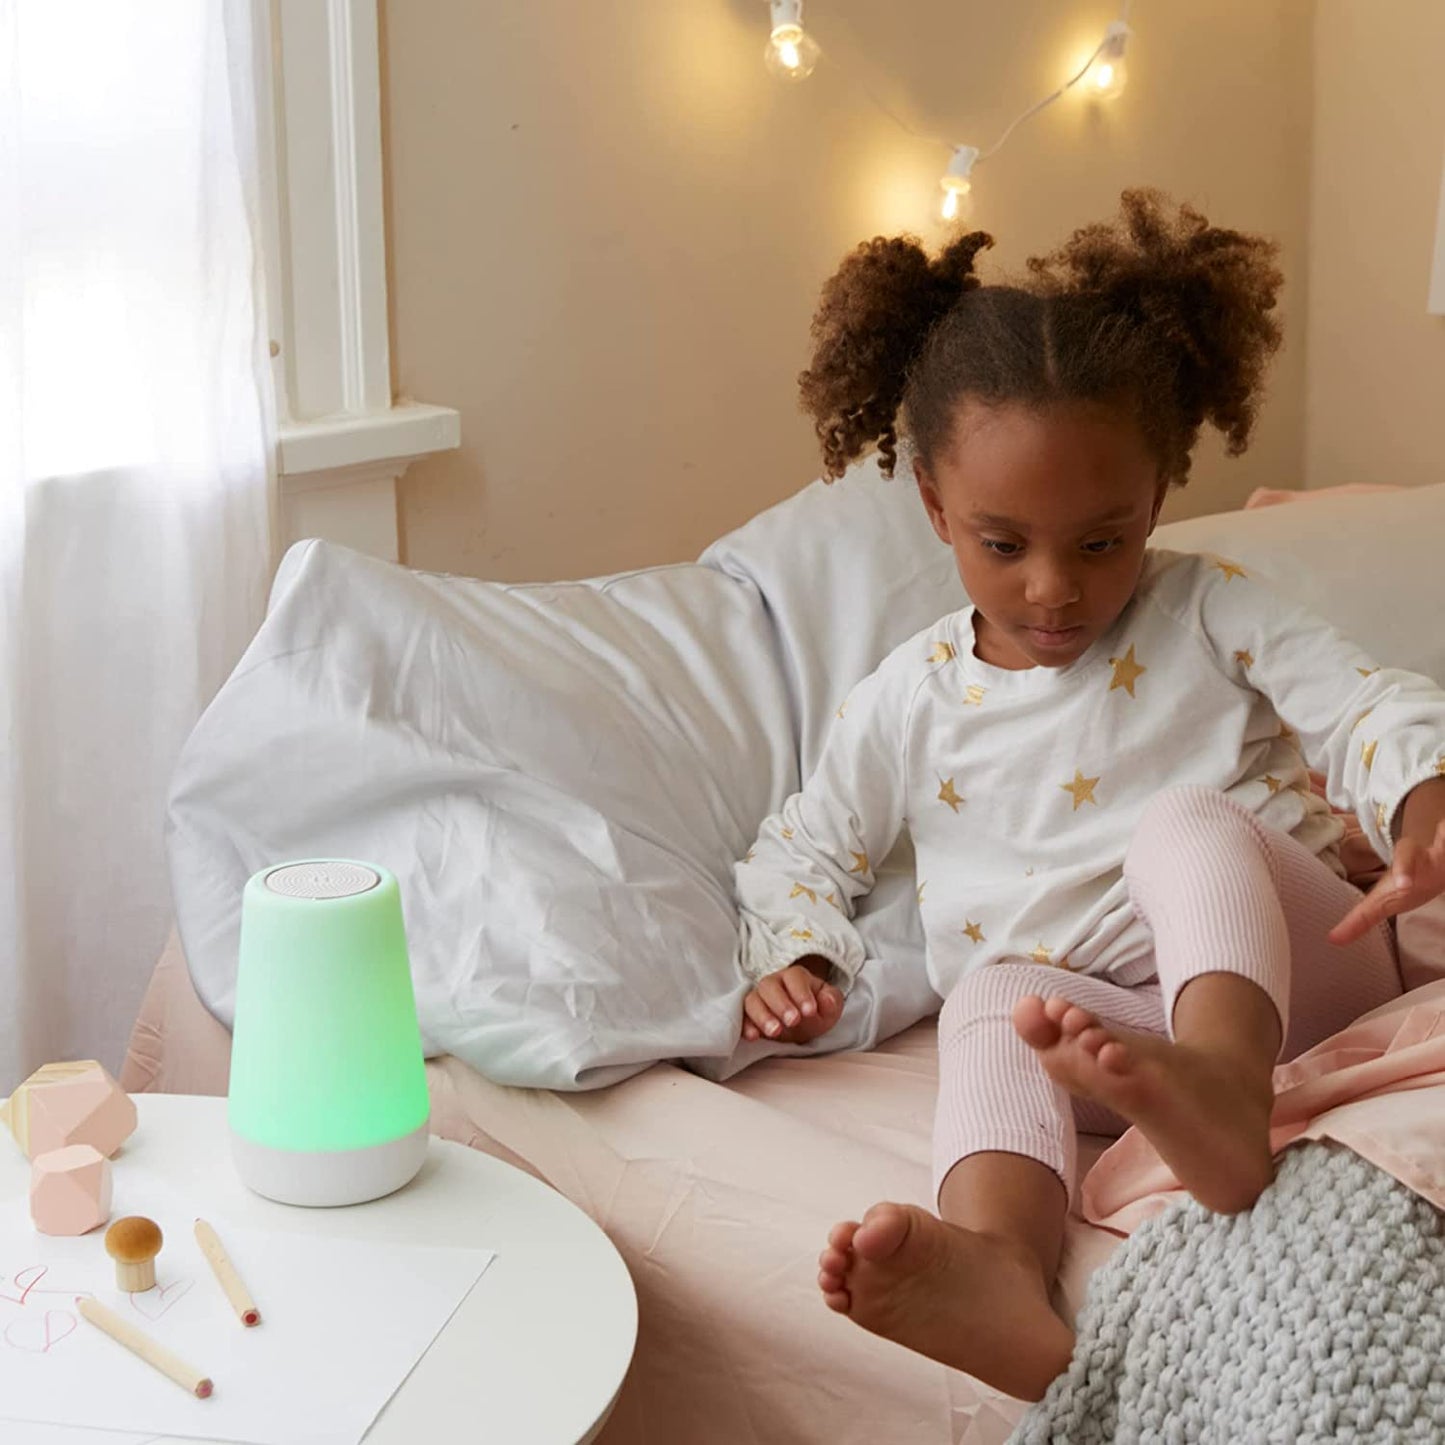 Hatch Rest+ Baby & Kids Sound Machine | 2Nd Gen | Child’S Night Light, Alarm Clock, Toddler Sleep Trainer, Time-To-Rise, White Noise, Bedtime Stories, Portable, Backup Battery (With Charging Base)